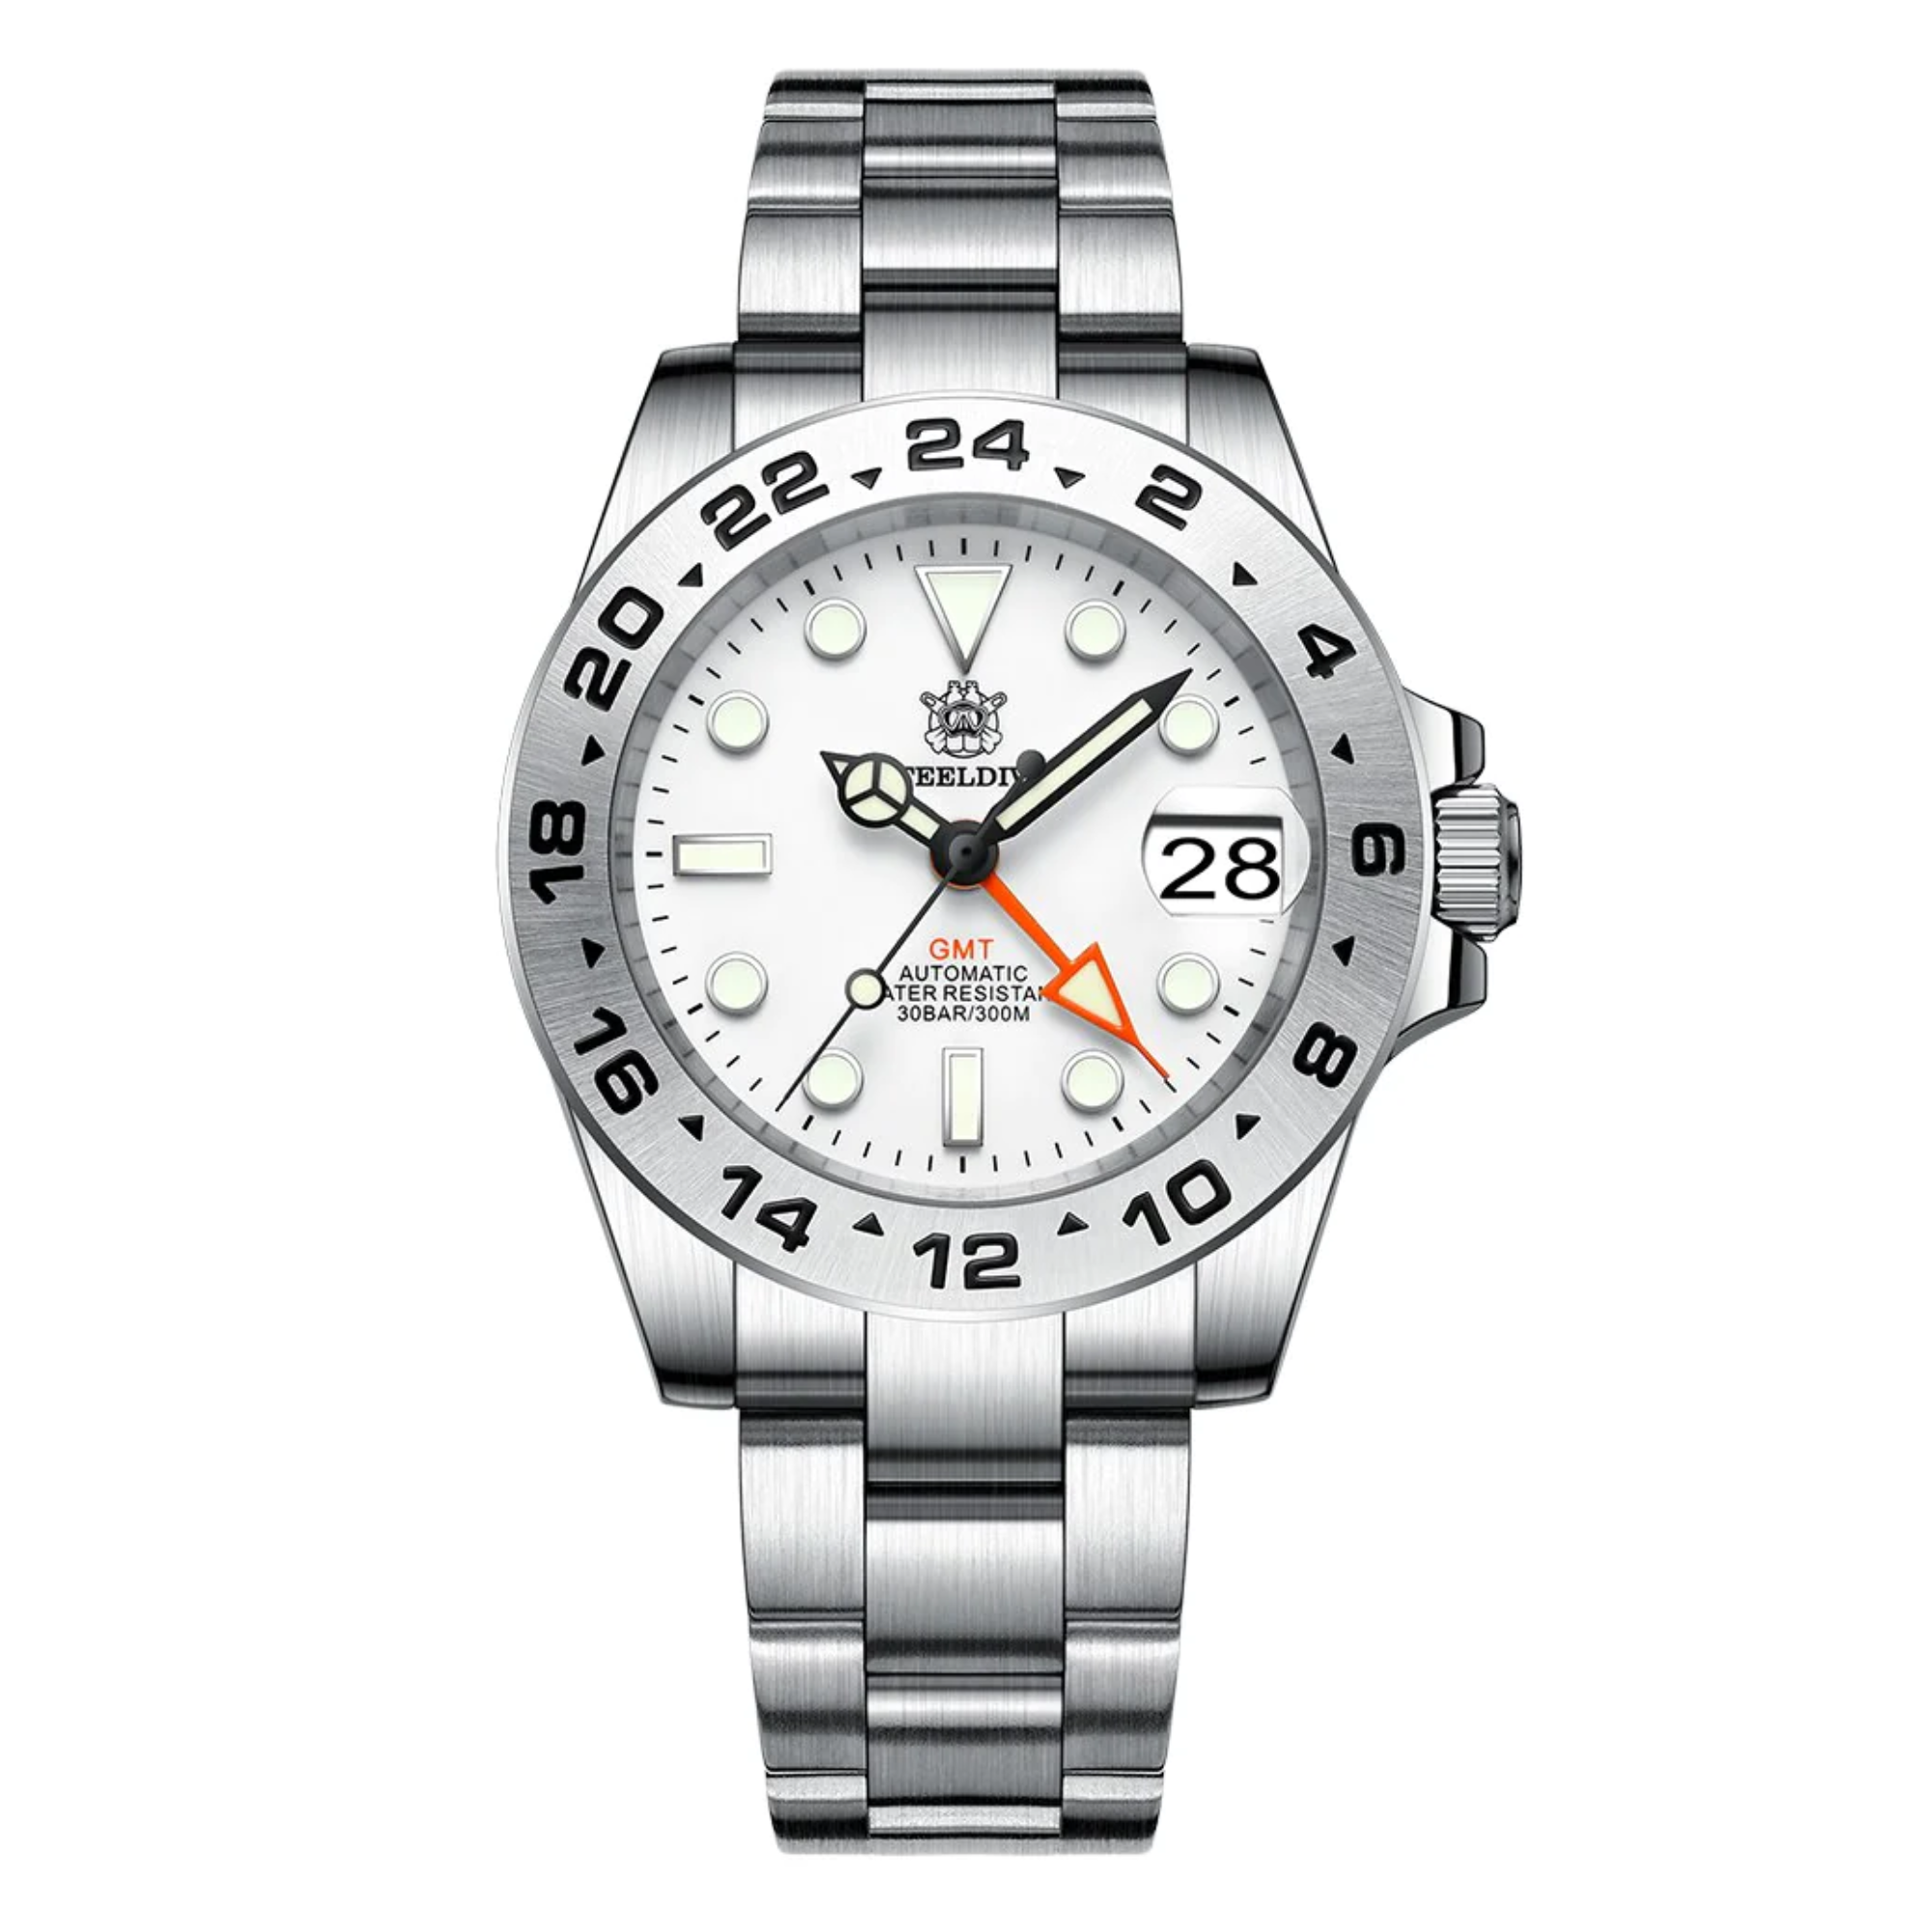 Steeldive SD1992 NH34 GMT Automatic Watch - White Dial